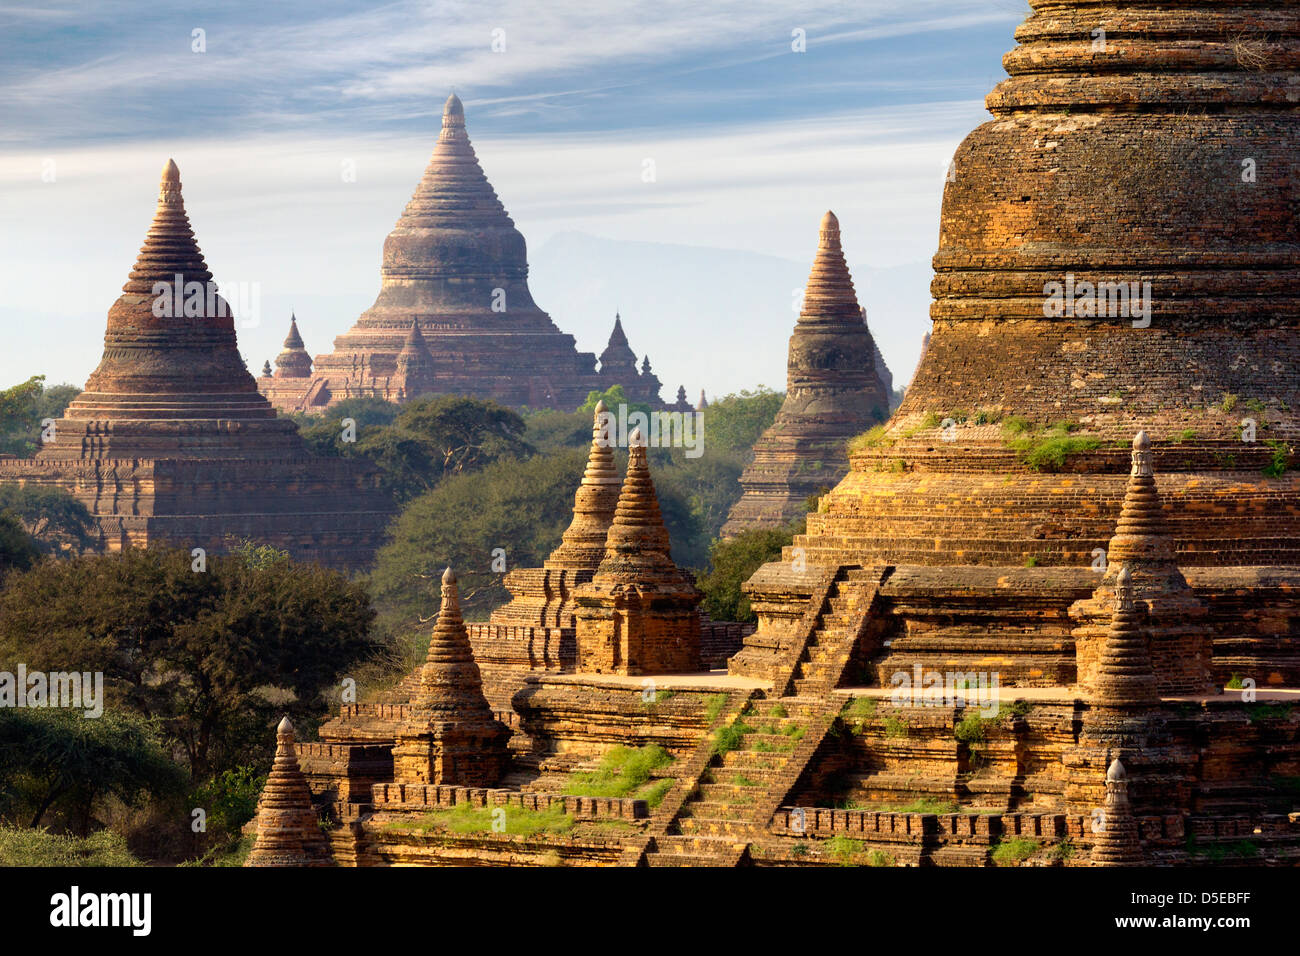 The Temples and Pagodas of Bagan, Myanmar - early morning 5 Stock Photo